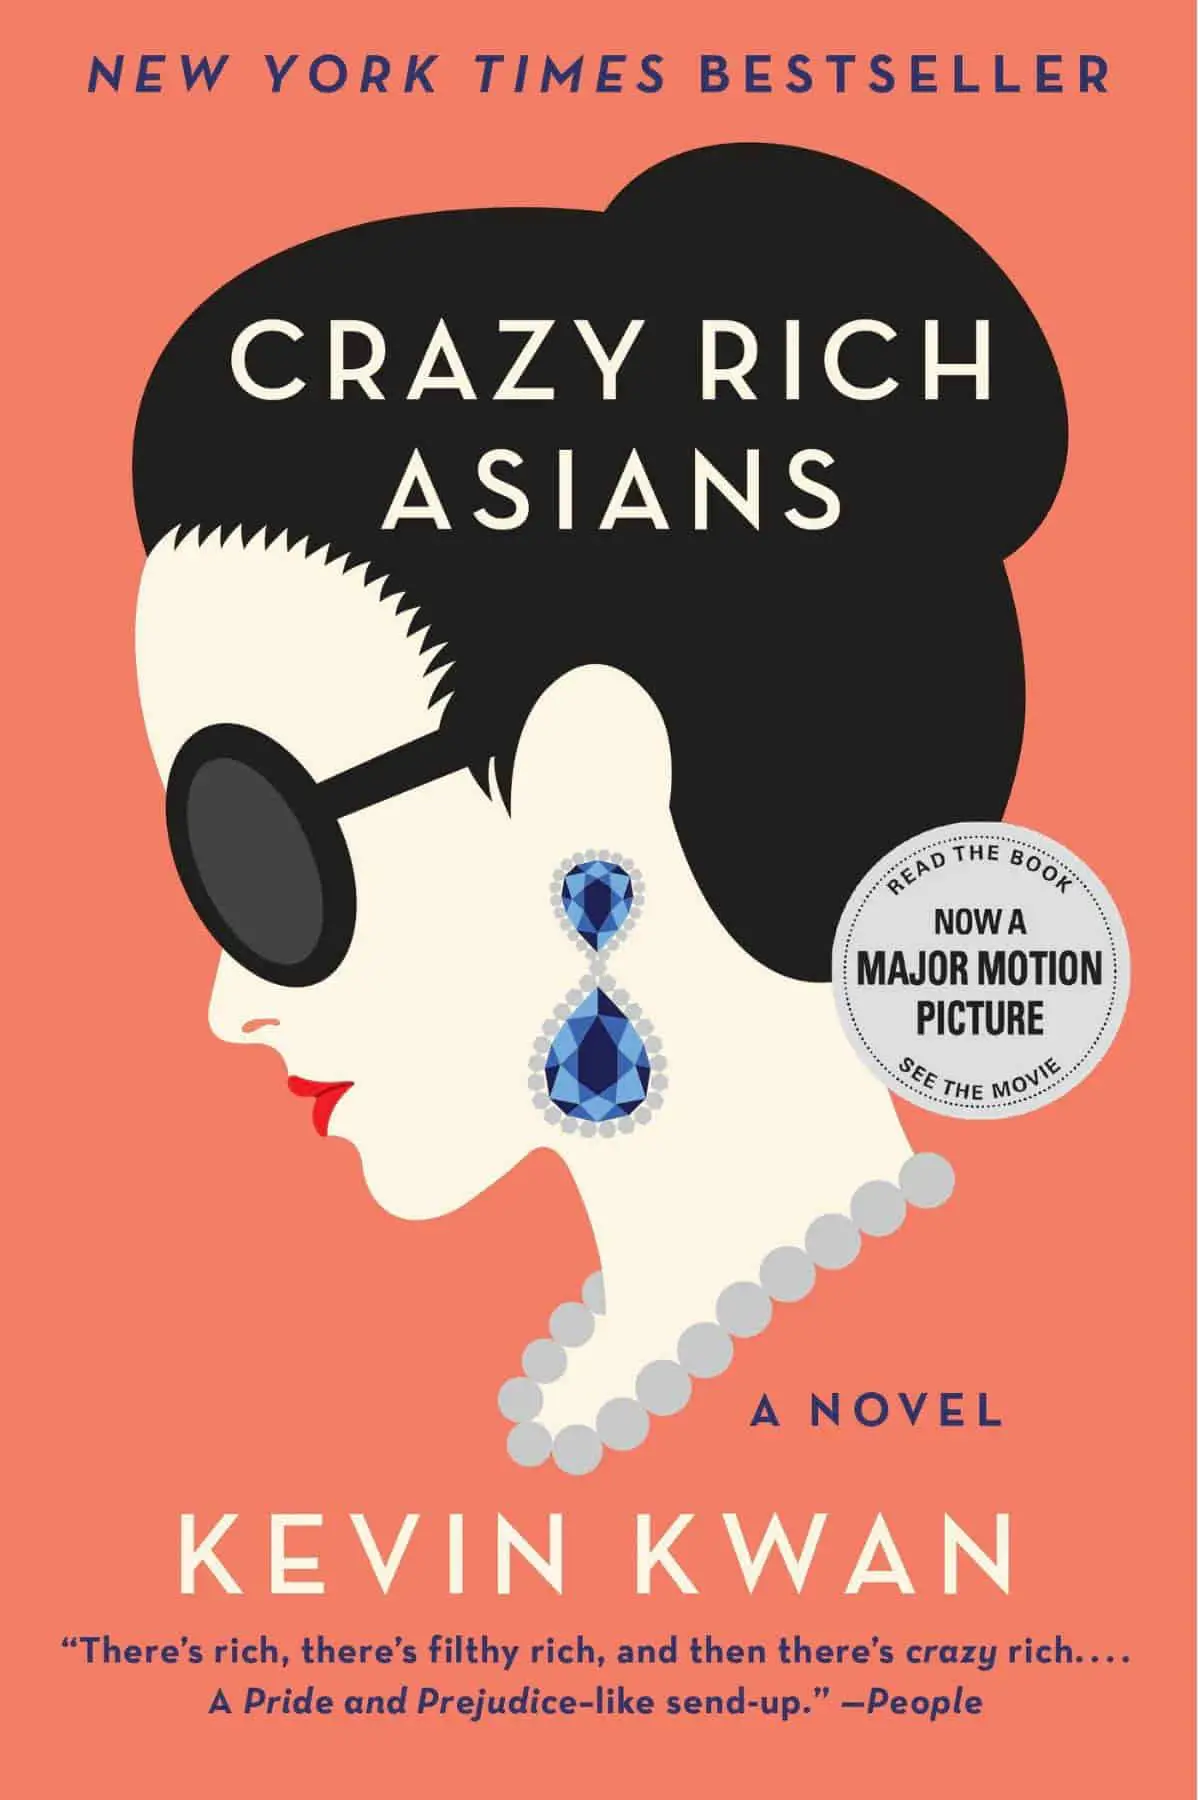 Trendy Cousin: Crazy Rich Asians by Kevin Kwan | Top Kindle Books of 2018 | Gift Ideas For Each Member of the Family